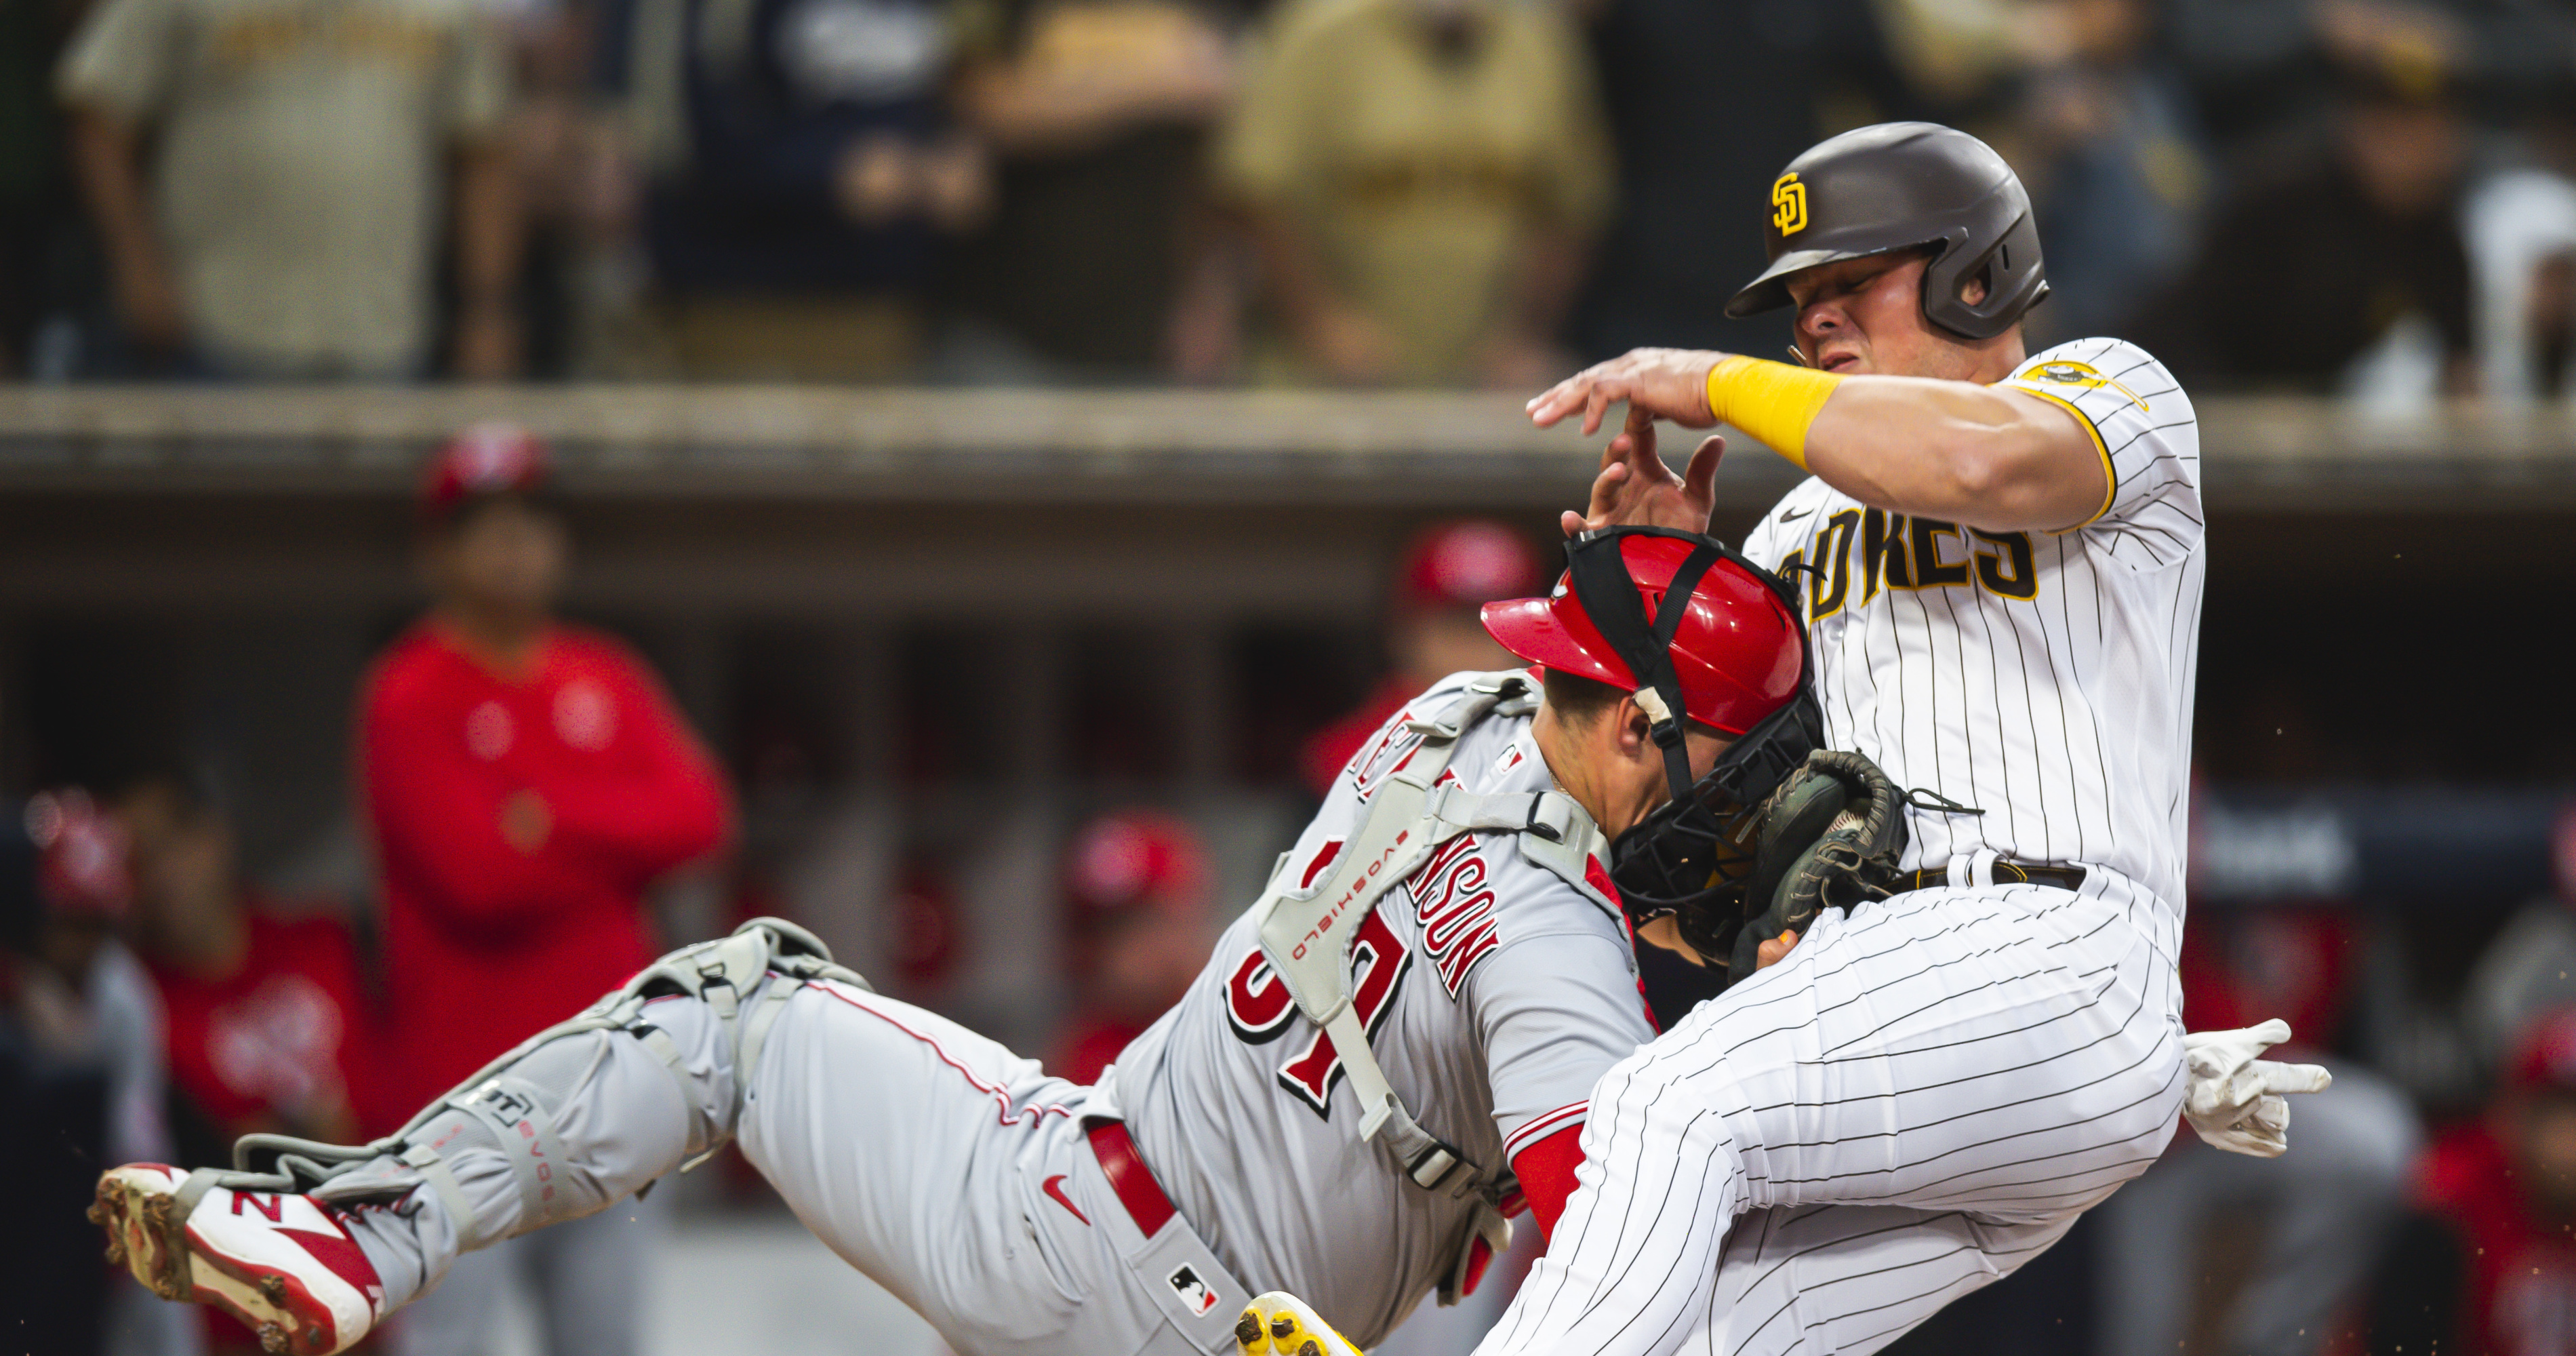 Cincinnati Reds unhappy with Luke Voit for 'dirty' slide into